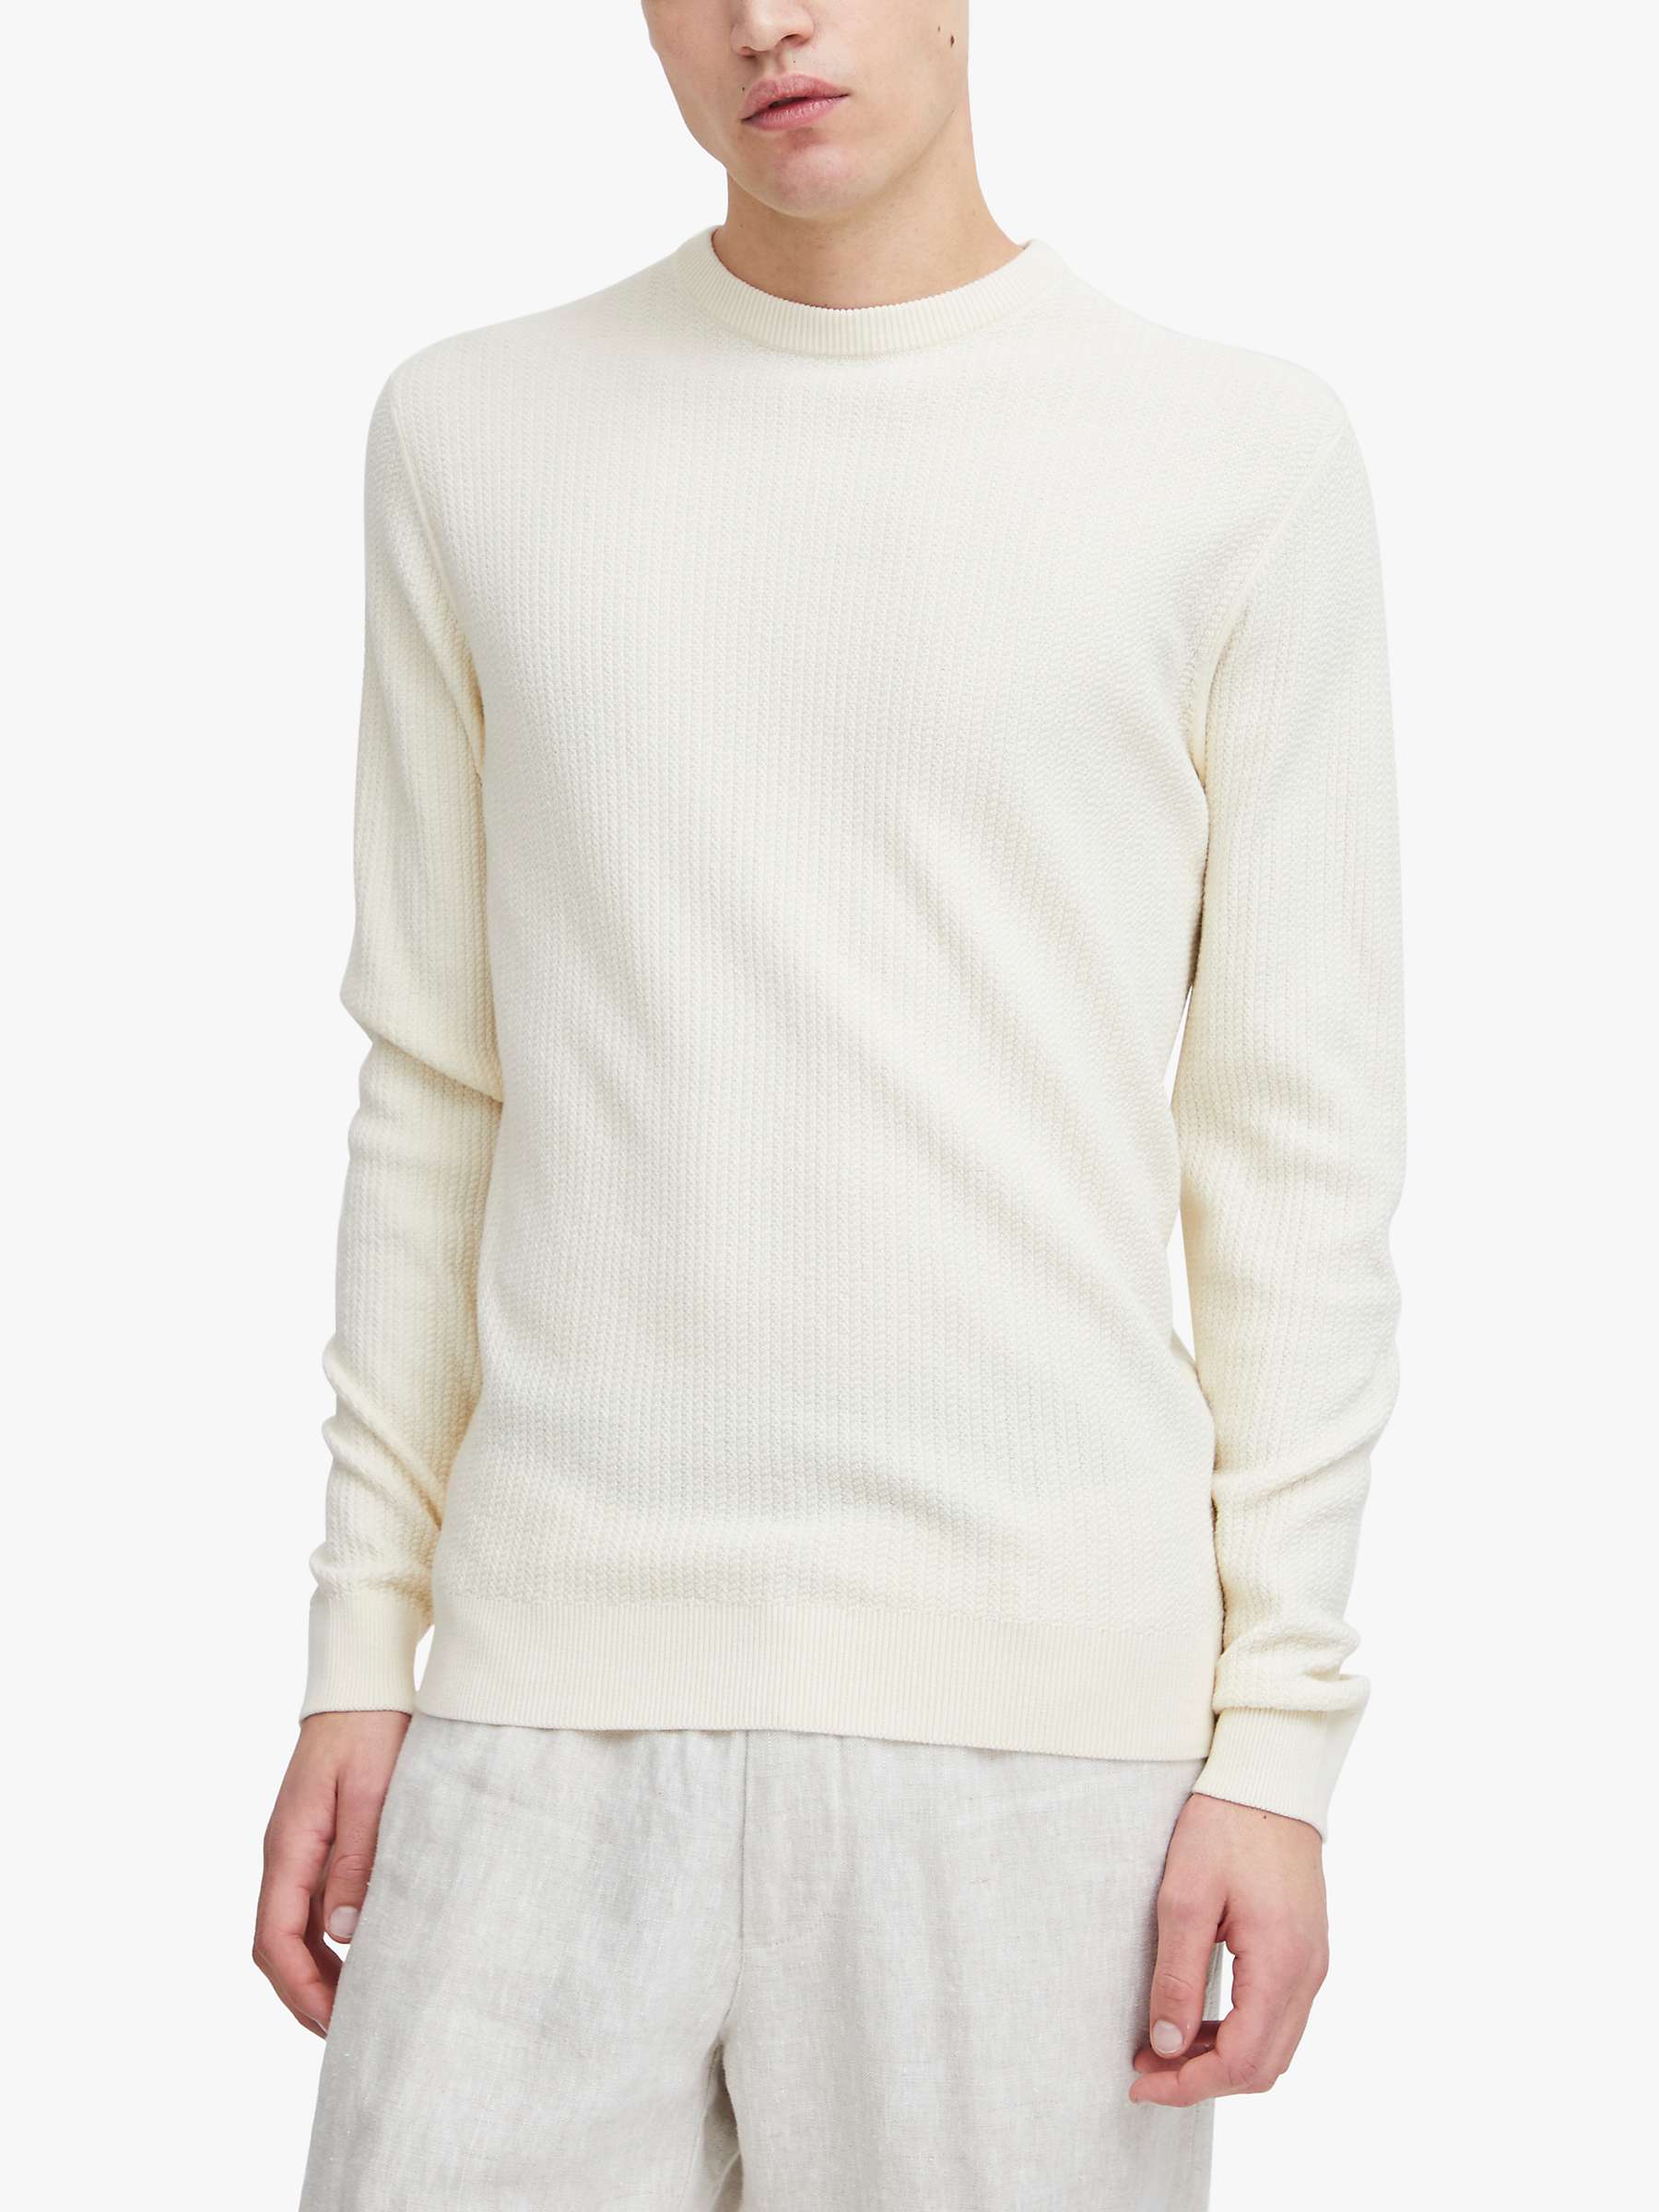 Buy Casual Friday Karl Long Sleeve Crew Neck Knit Jumper Online at johnlewis.com